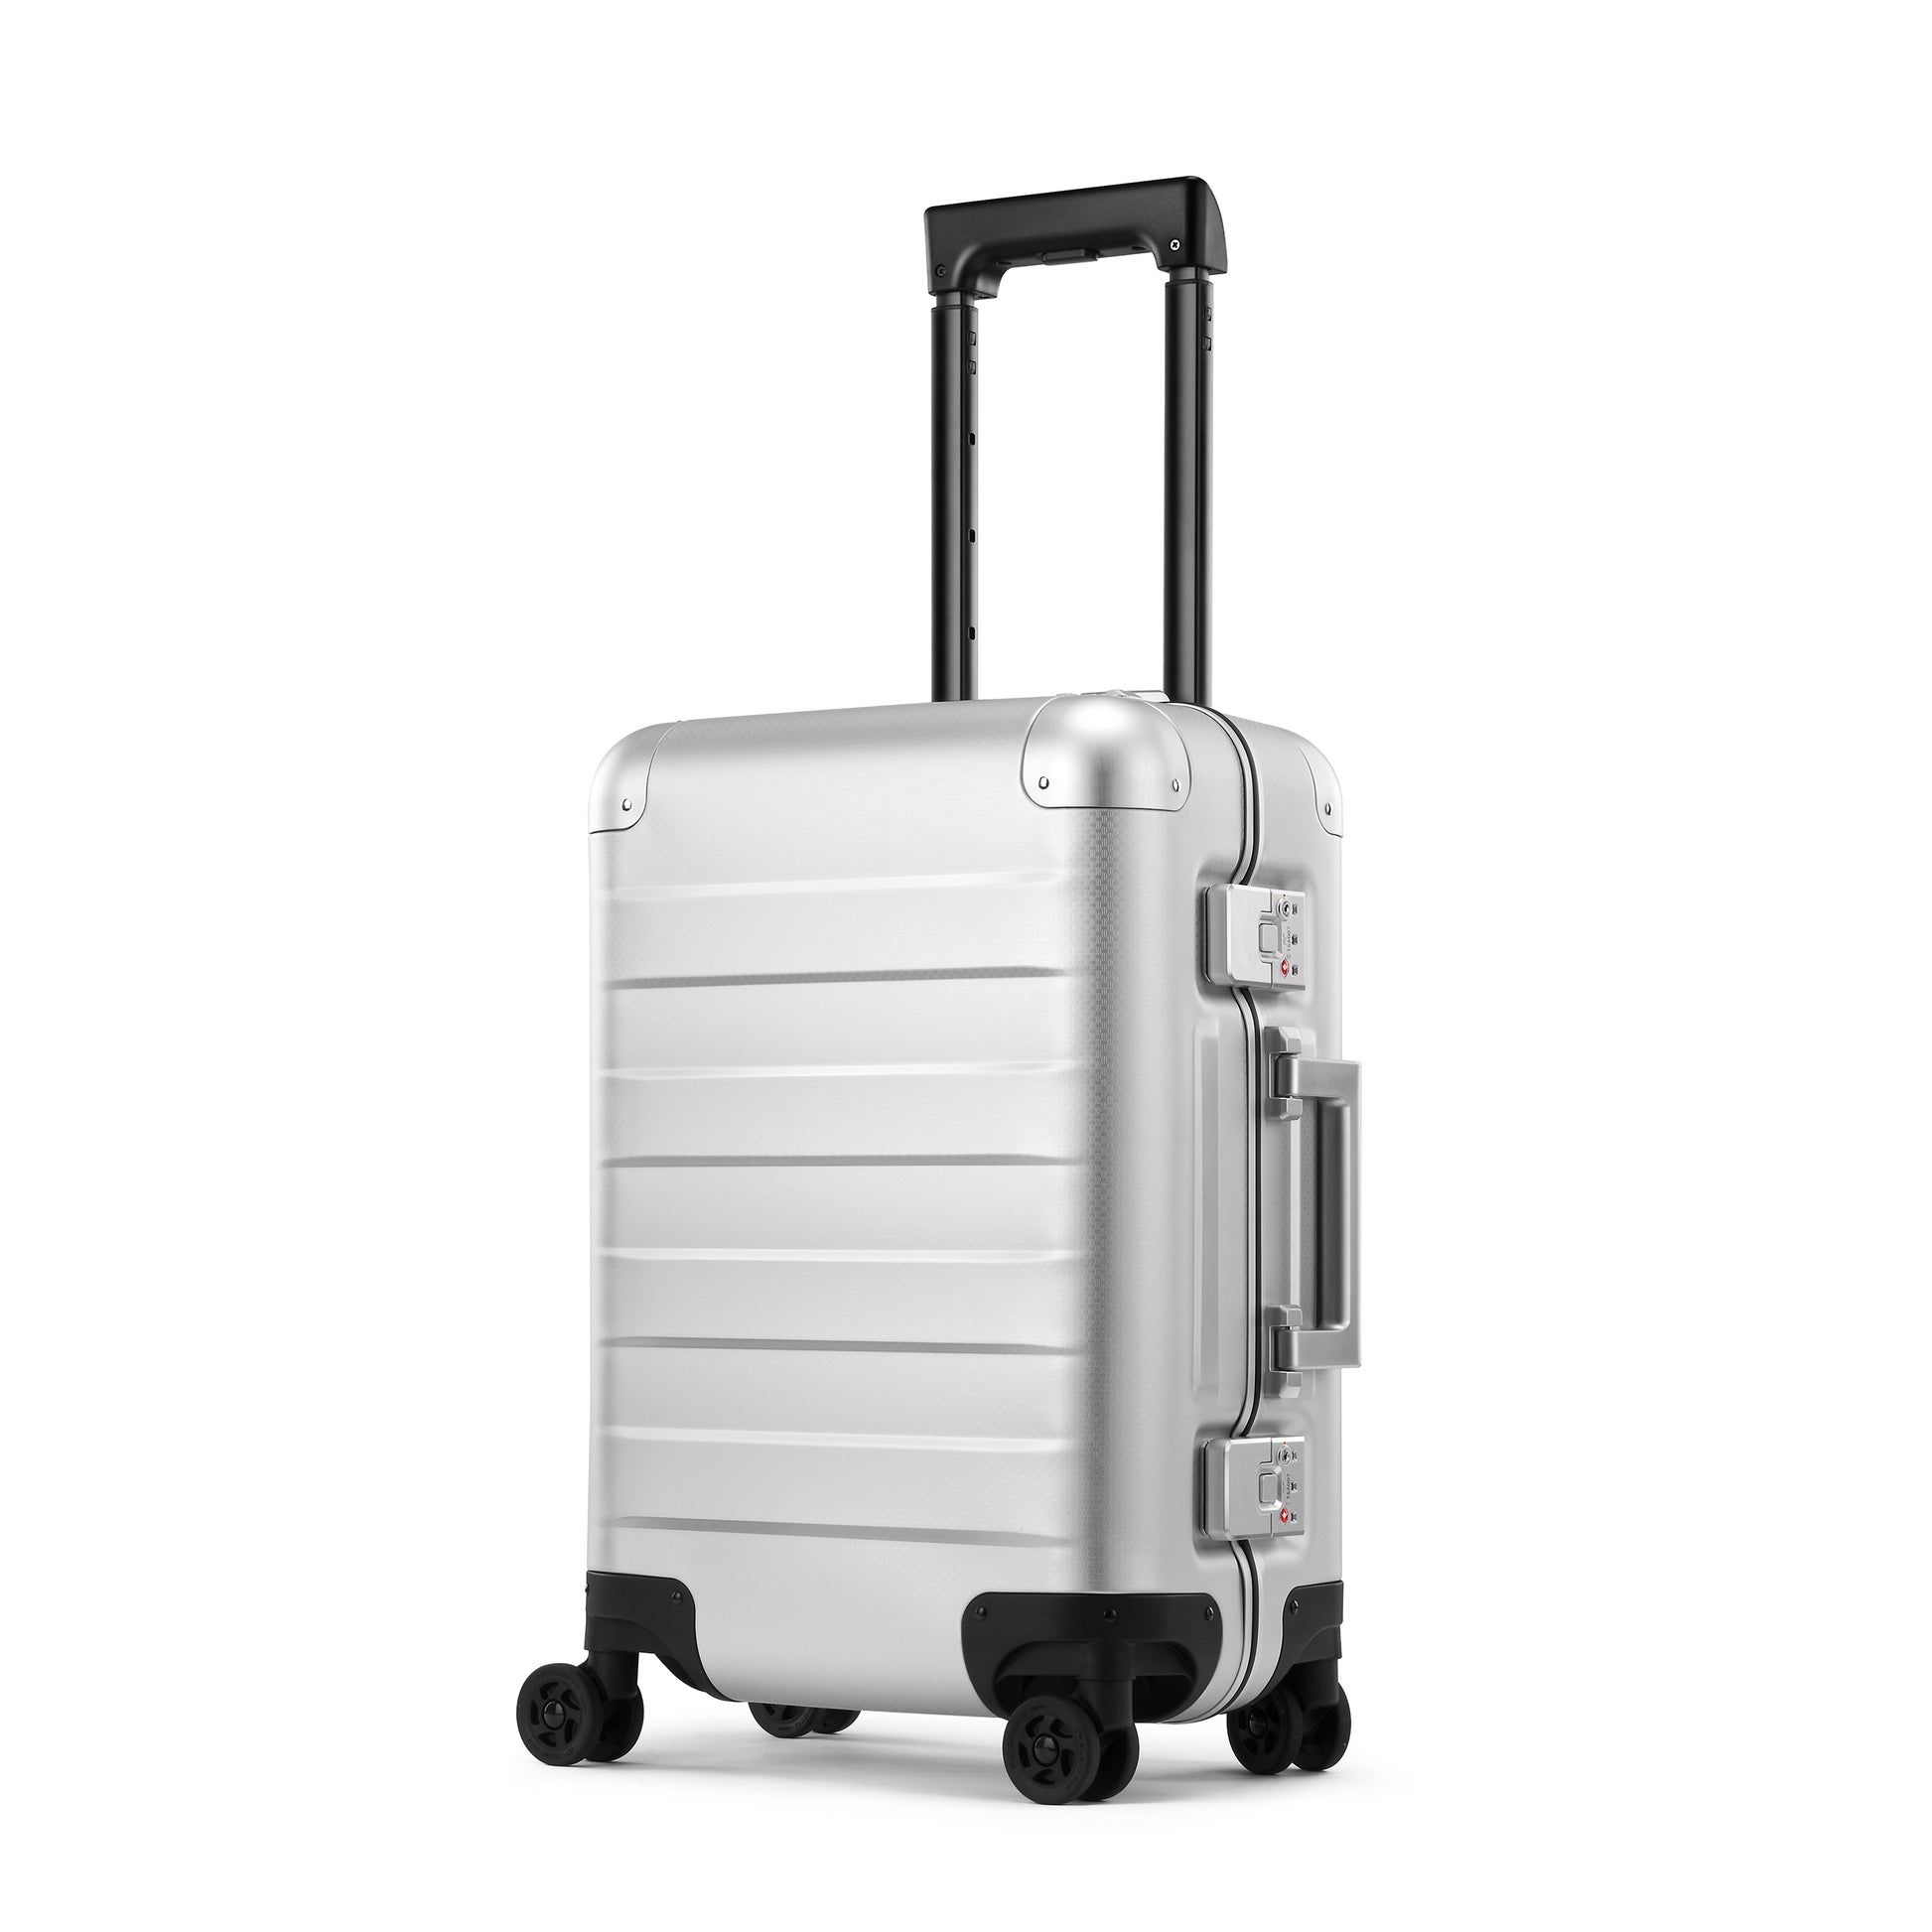 GILBANO carry-on suitcase